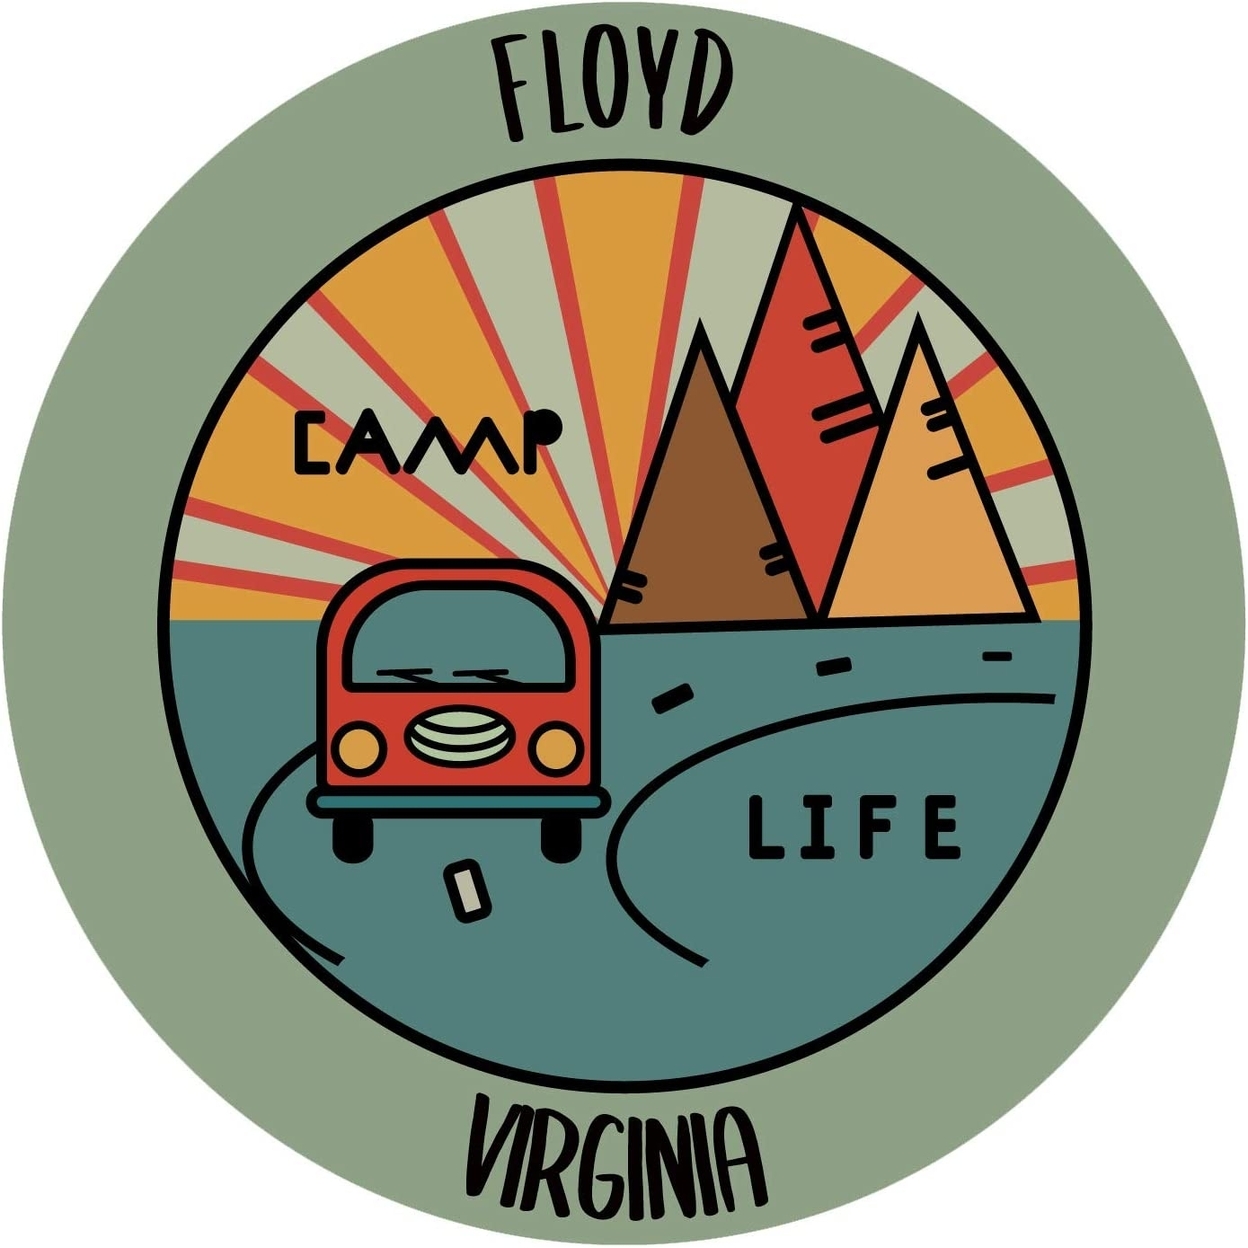 Floyd Virginia Camp Life Souvenir Decorative Stickers Choice Of Size - 4-Pack, 4-Inch